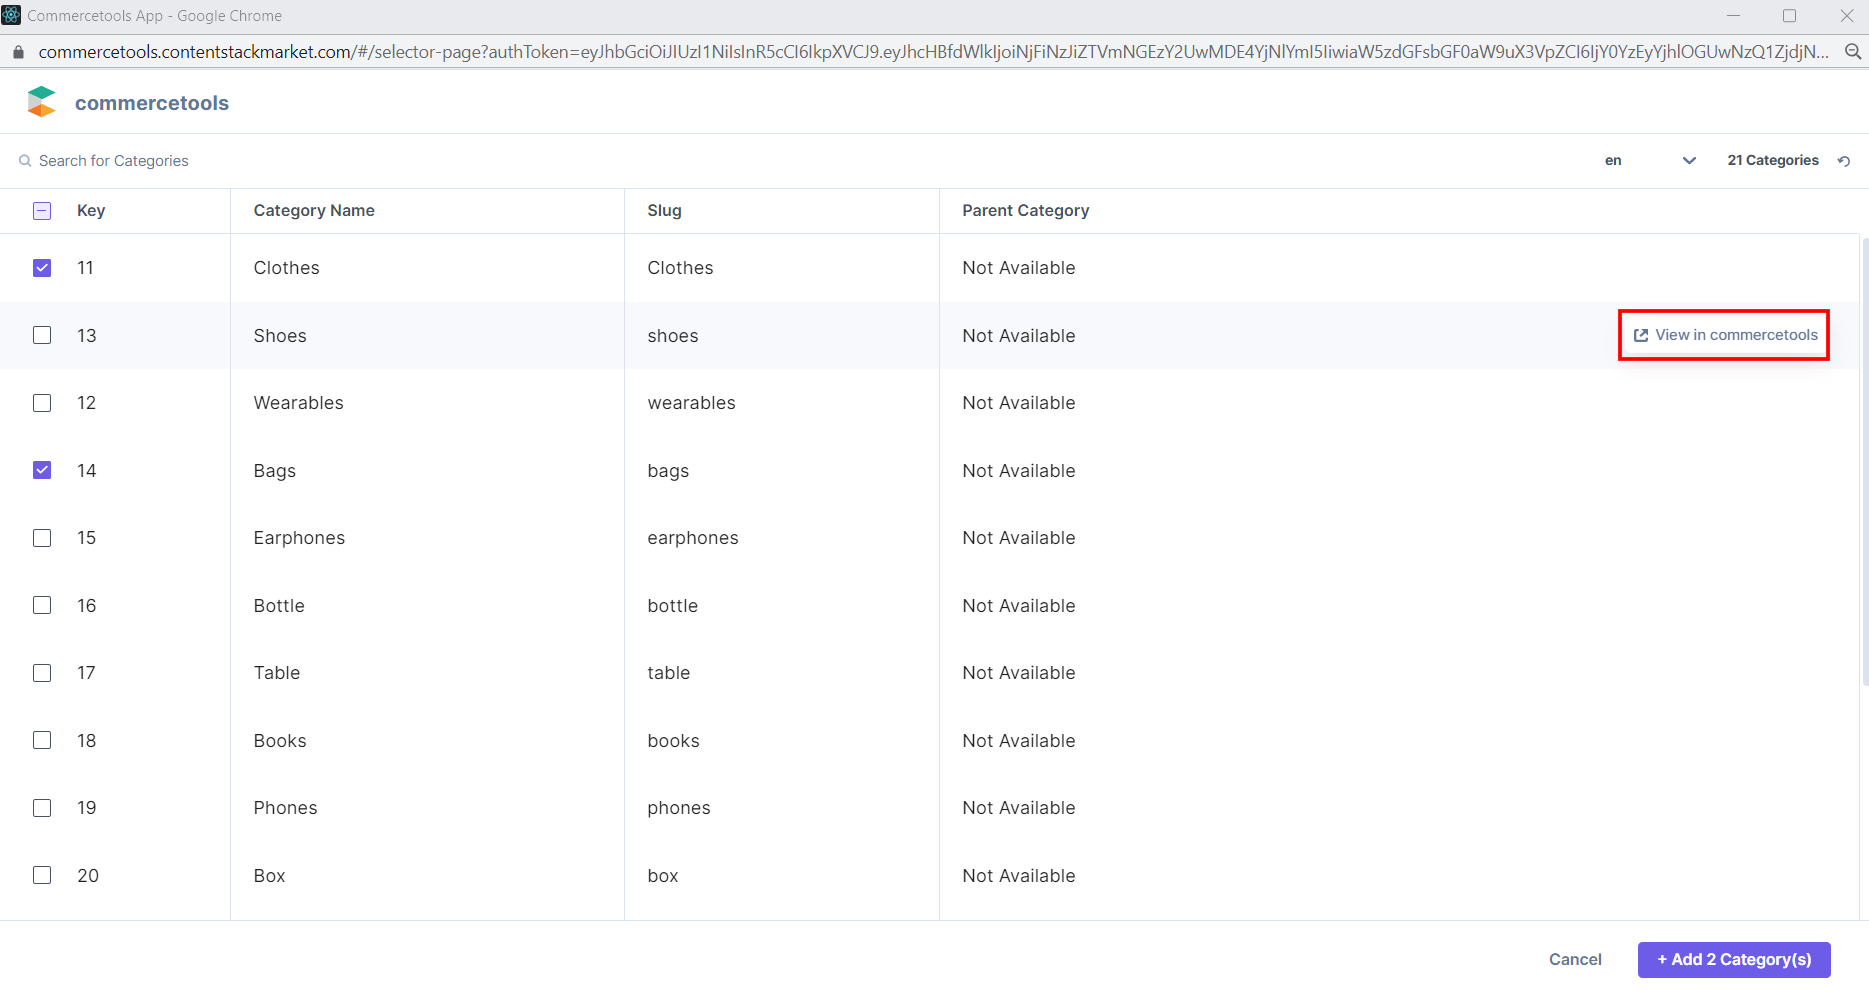 commercetools-Category-Selector-Page-View-In-commercetools